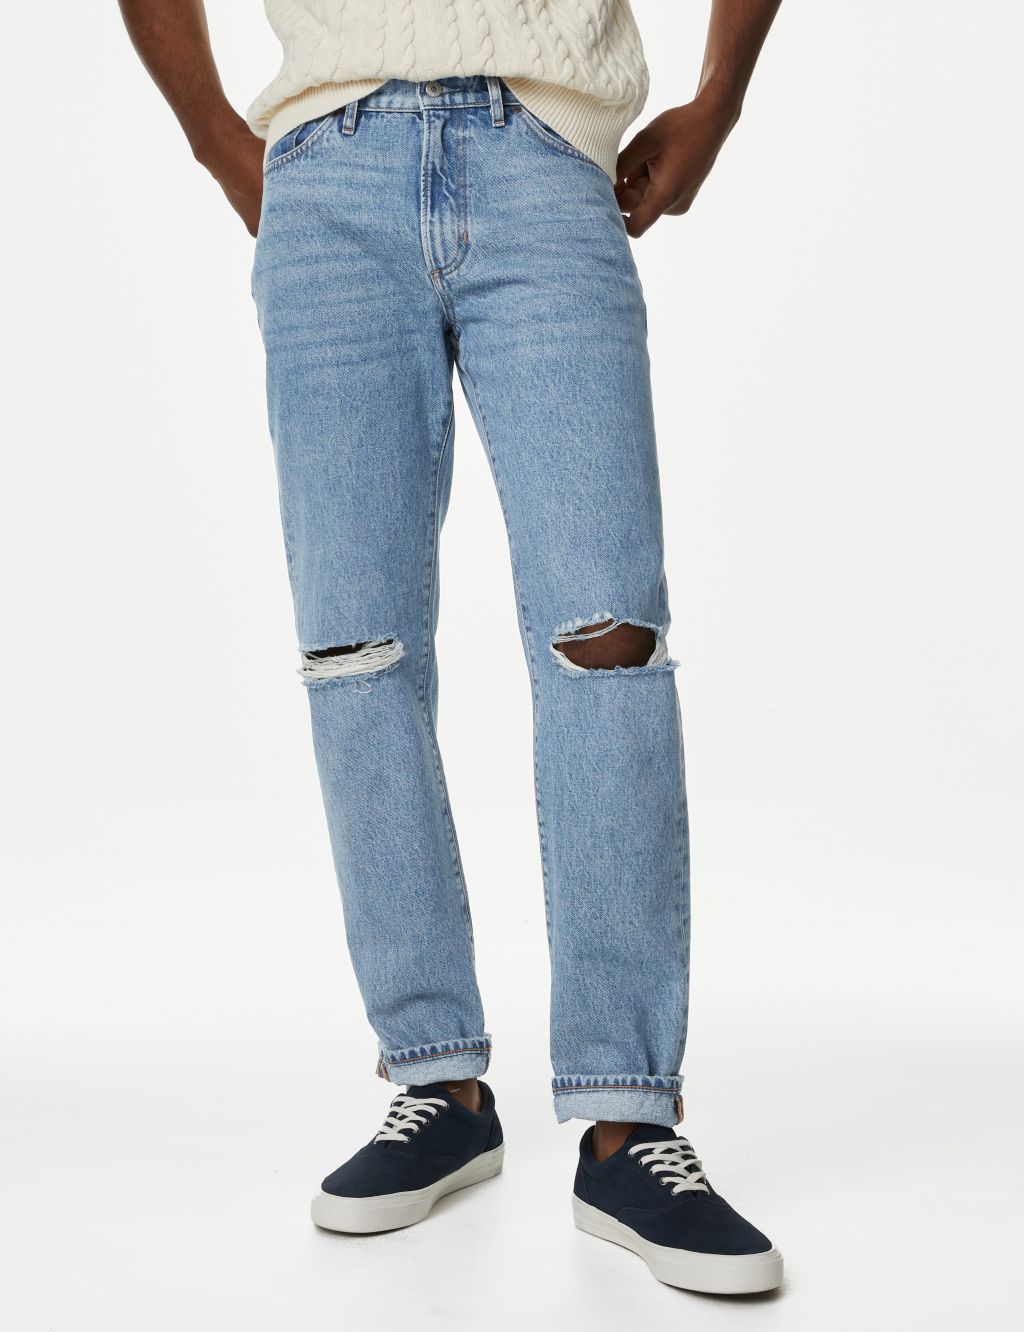 Straight Fit Pure Cotton Ripped Jeans image 1